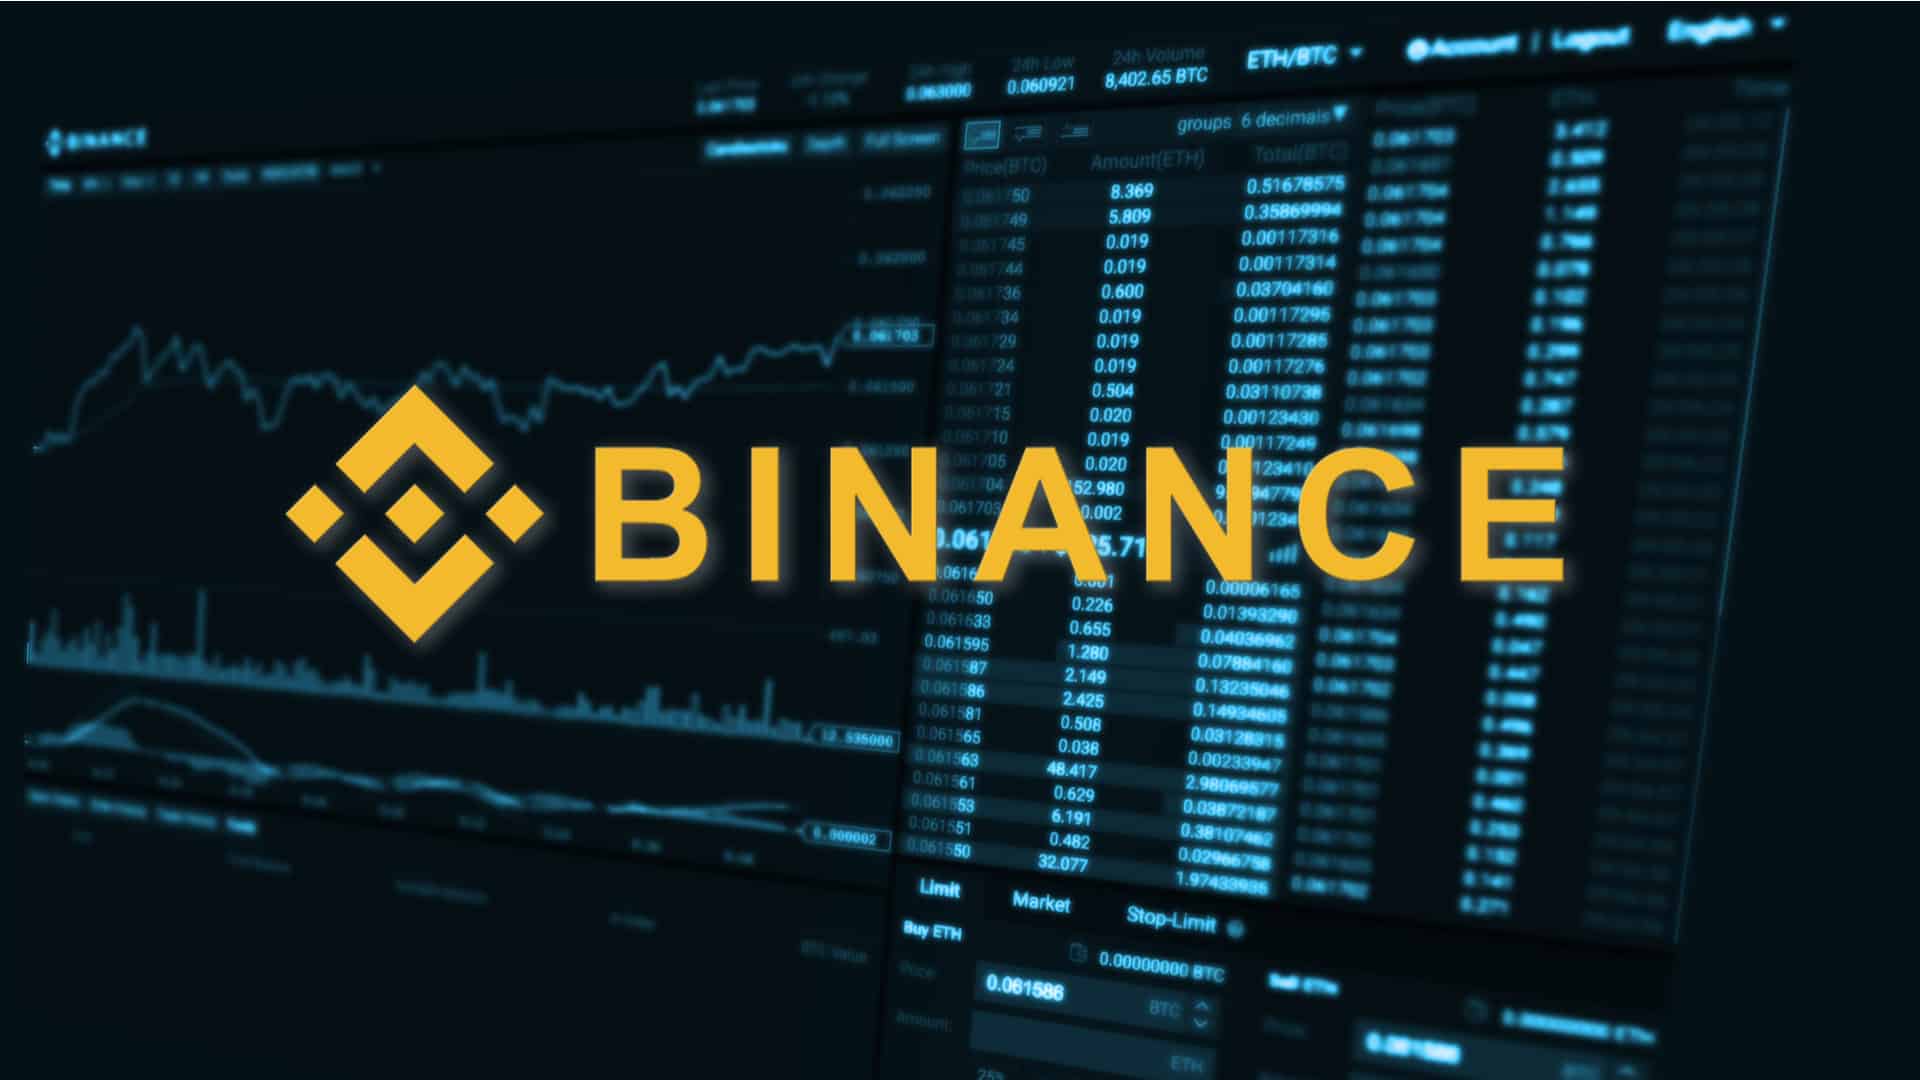 Binance US has been criticized for the recent fall of BTC to $ 8,000